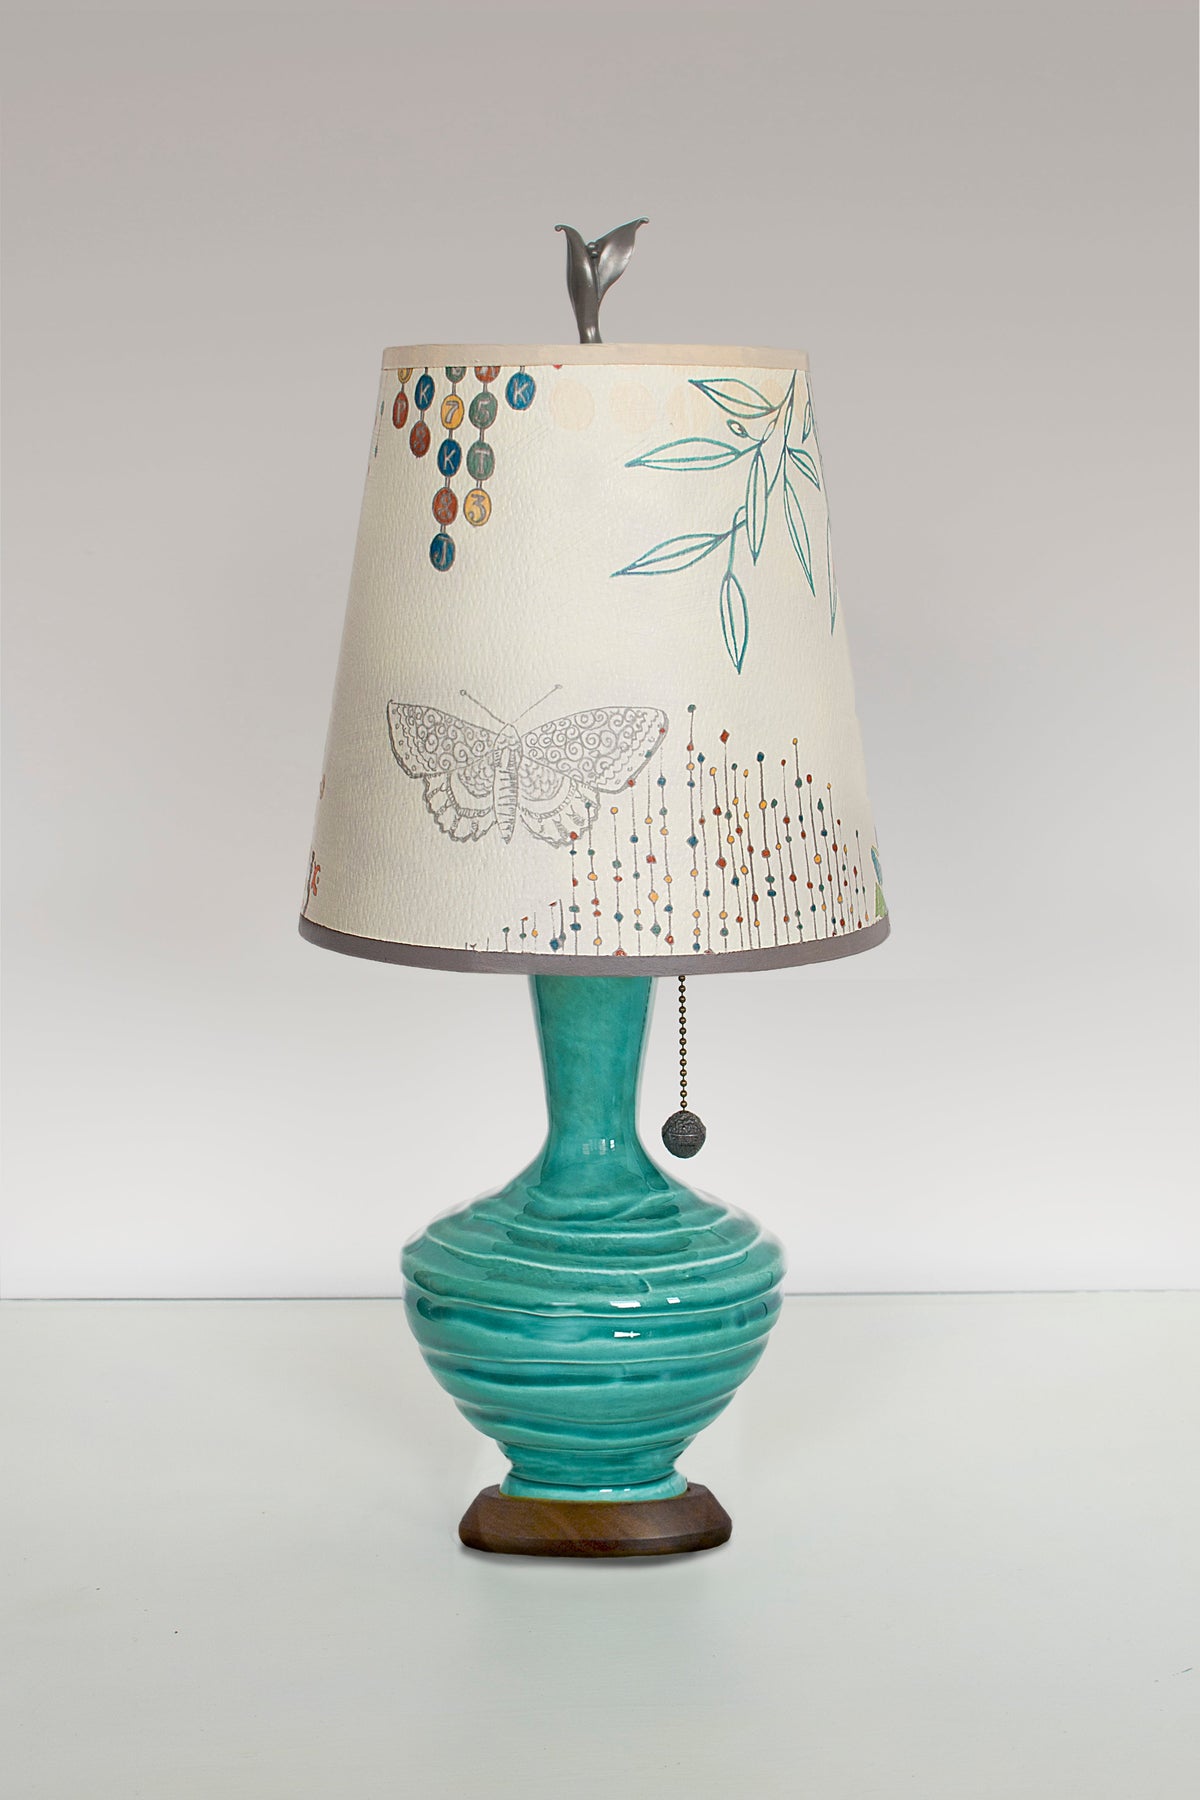 Janna Ugone &amp; Co Table Lamps Ceramic Table Lamp with Small Drum Shade in Ecru Journey